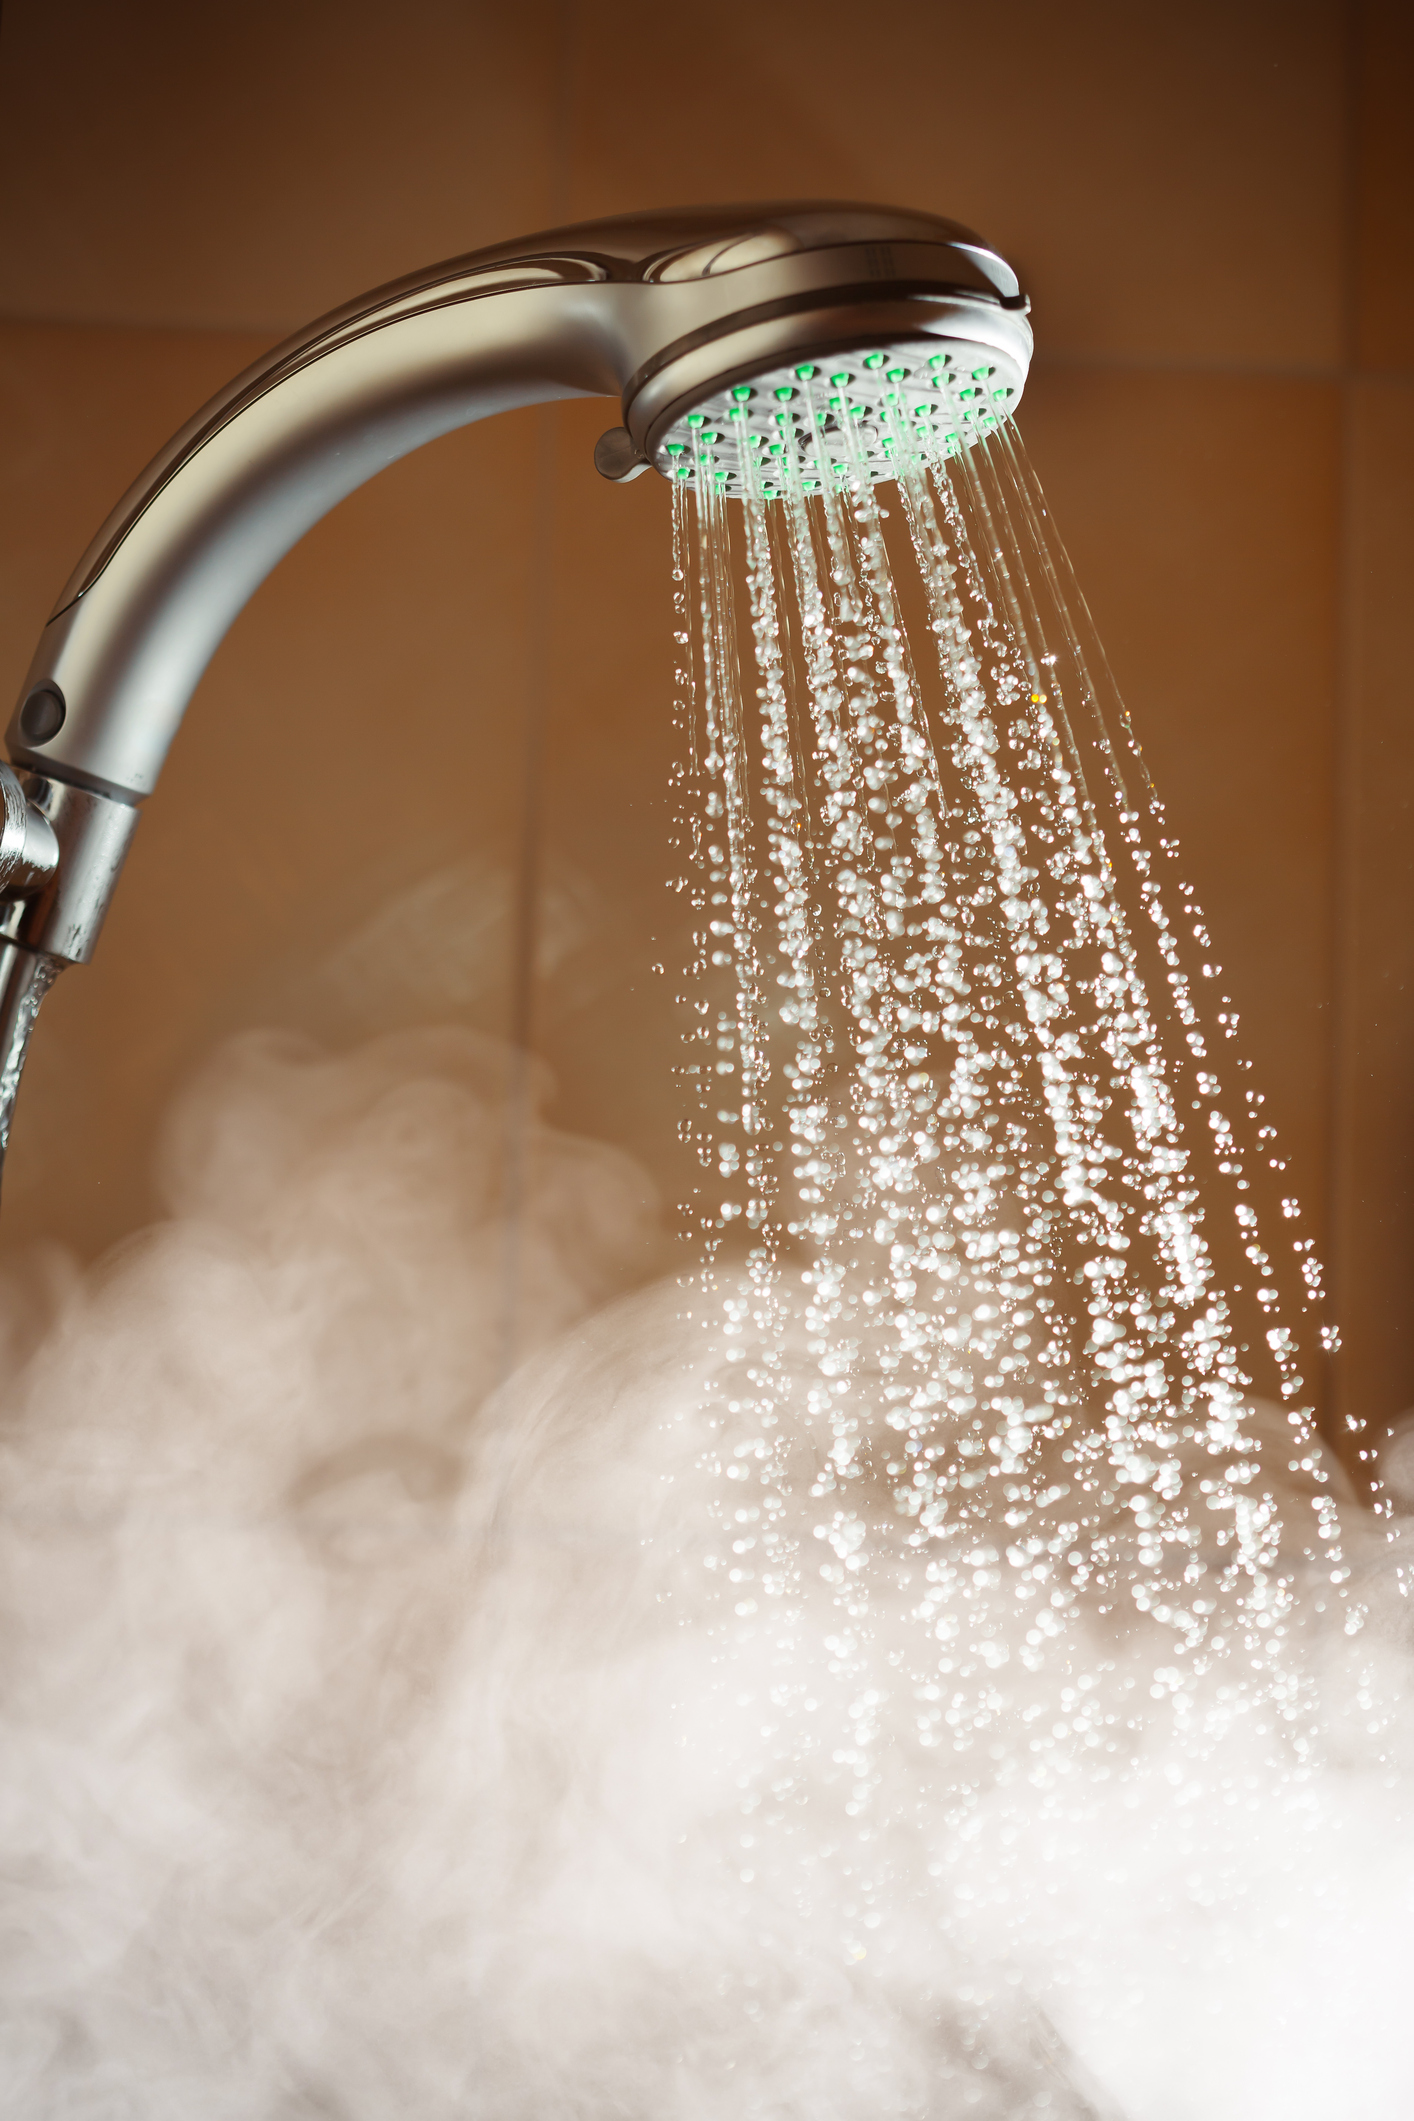 Hot Showers Can Dry Out Your Skin